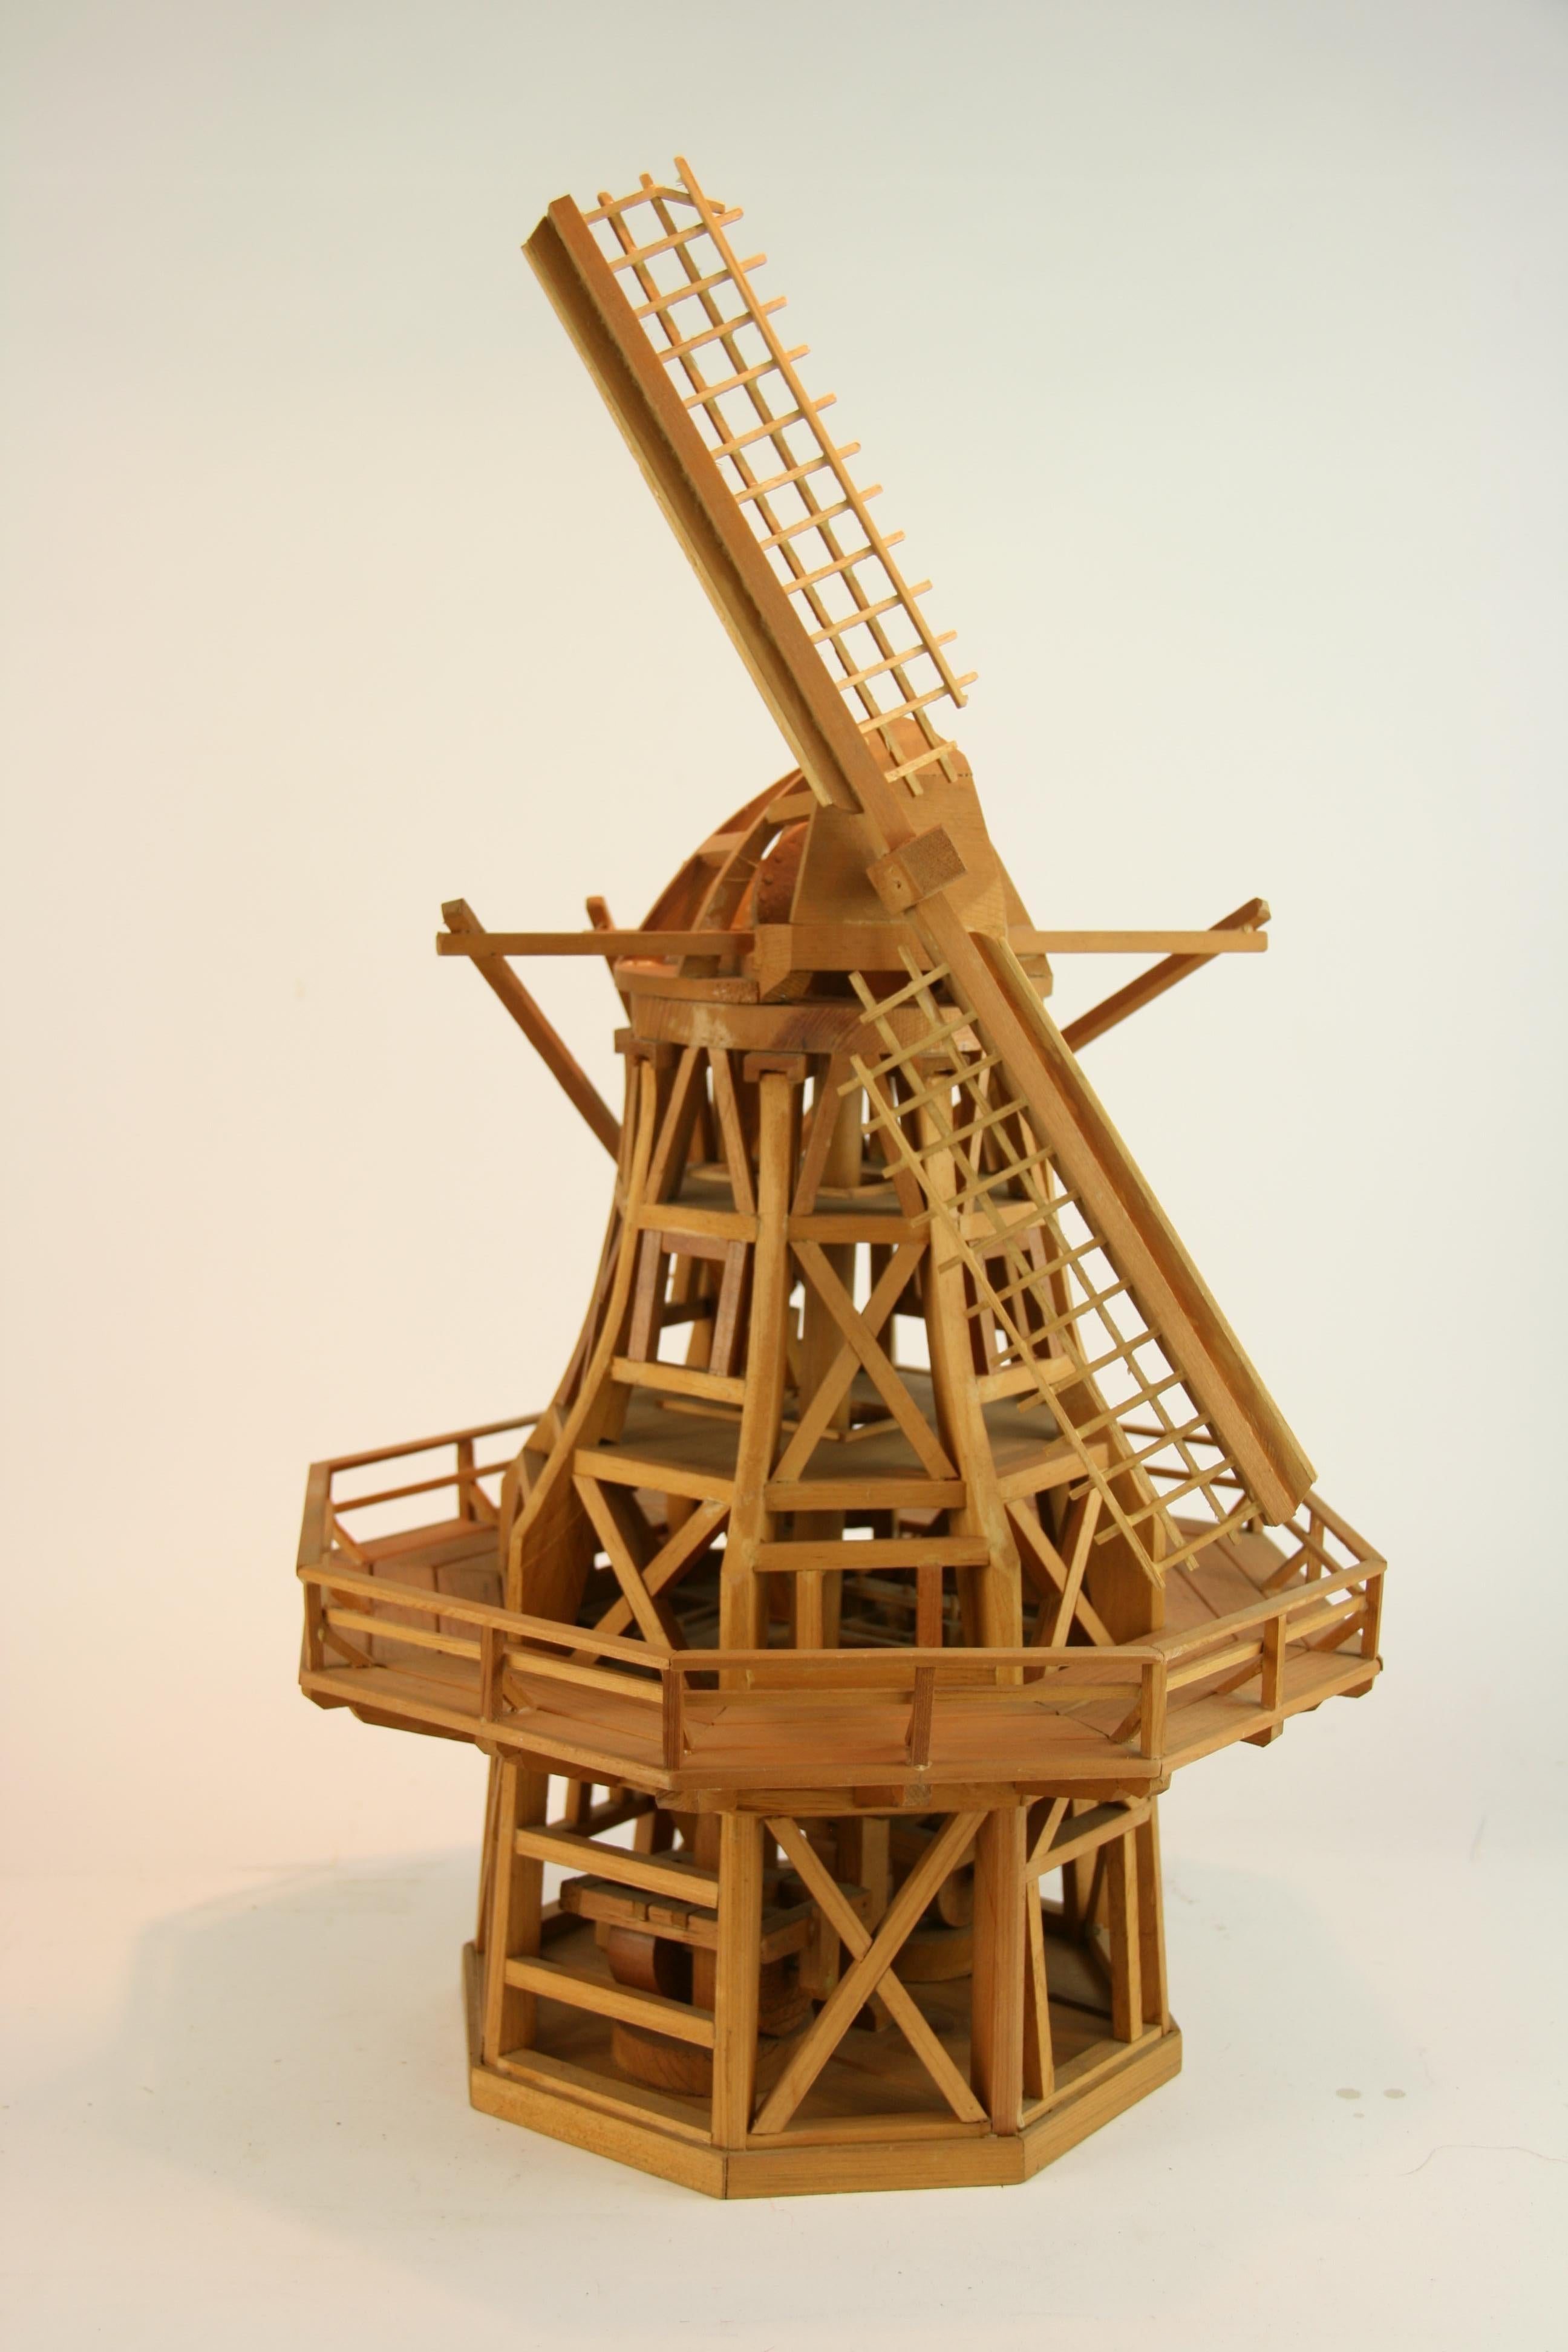 3-449 hand crafted wood architectural model of a windmill.
Detail of grinding stone on lower level and stairs to each level.
Missing 2 of the spoke for the sails and back rail
Measures: Height to top of tower 17'
Height to top of sail 28